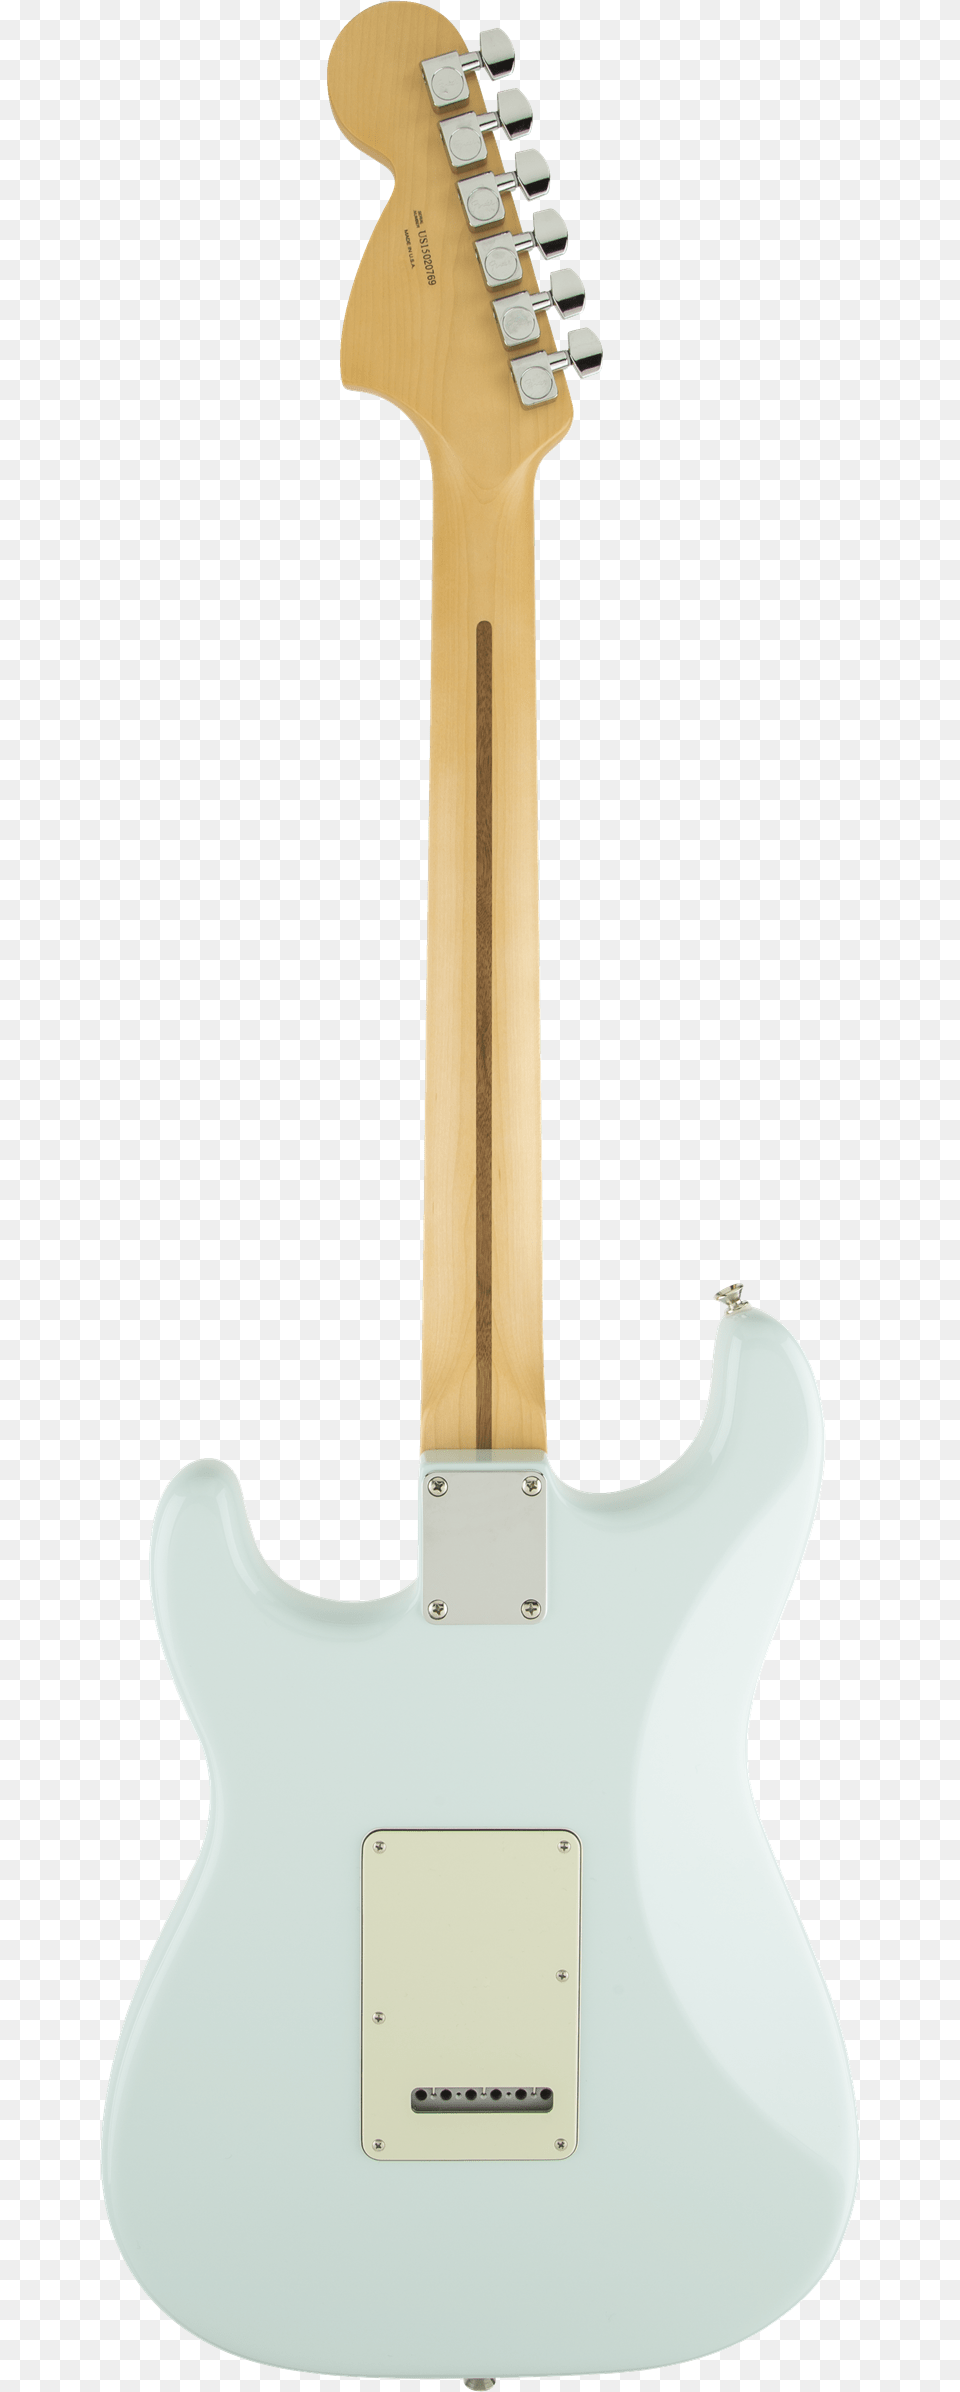 Fender American Special Stratocaster Rosewood Sonic Fender Player Stratocaster Buttercream, Electric Guitar, Guitar, Musical Instrument Png Image